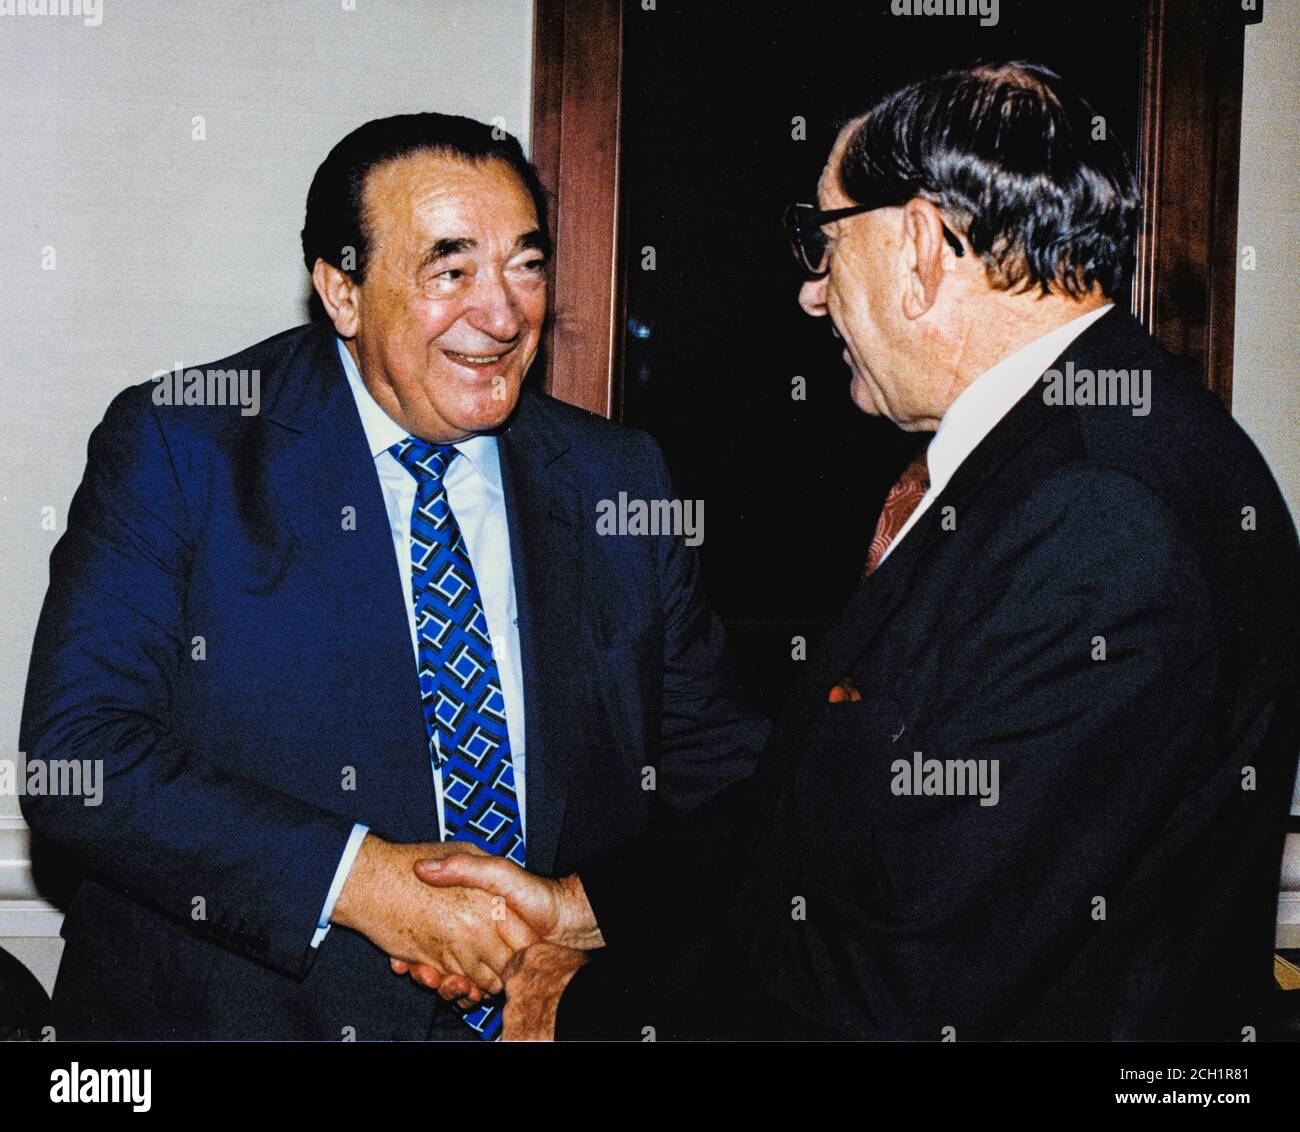 In this file photo from September 25, 1990, disgraced publisher Robert Maxwell, left, meets South African Ambassador to the United States Piet G.J. Koornhof in Washington, DC on September 25, 1990. The New York Post is reporting today that Maxwell, through his daughter Ghislaine Maxwell, may have been the source the huge fortune amassed by alleged pedophile Jeffrey Epstein, who hanged himself in his Manhattan lockup last August.Credit: Ron Sachs/CNP | usage worldwide Stock Photo